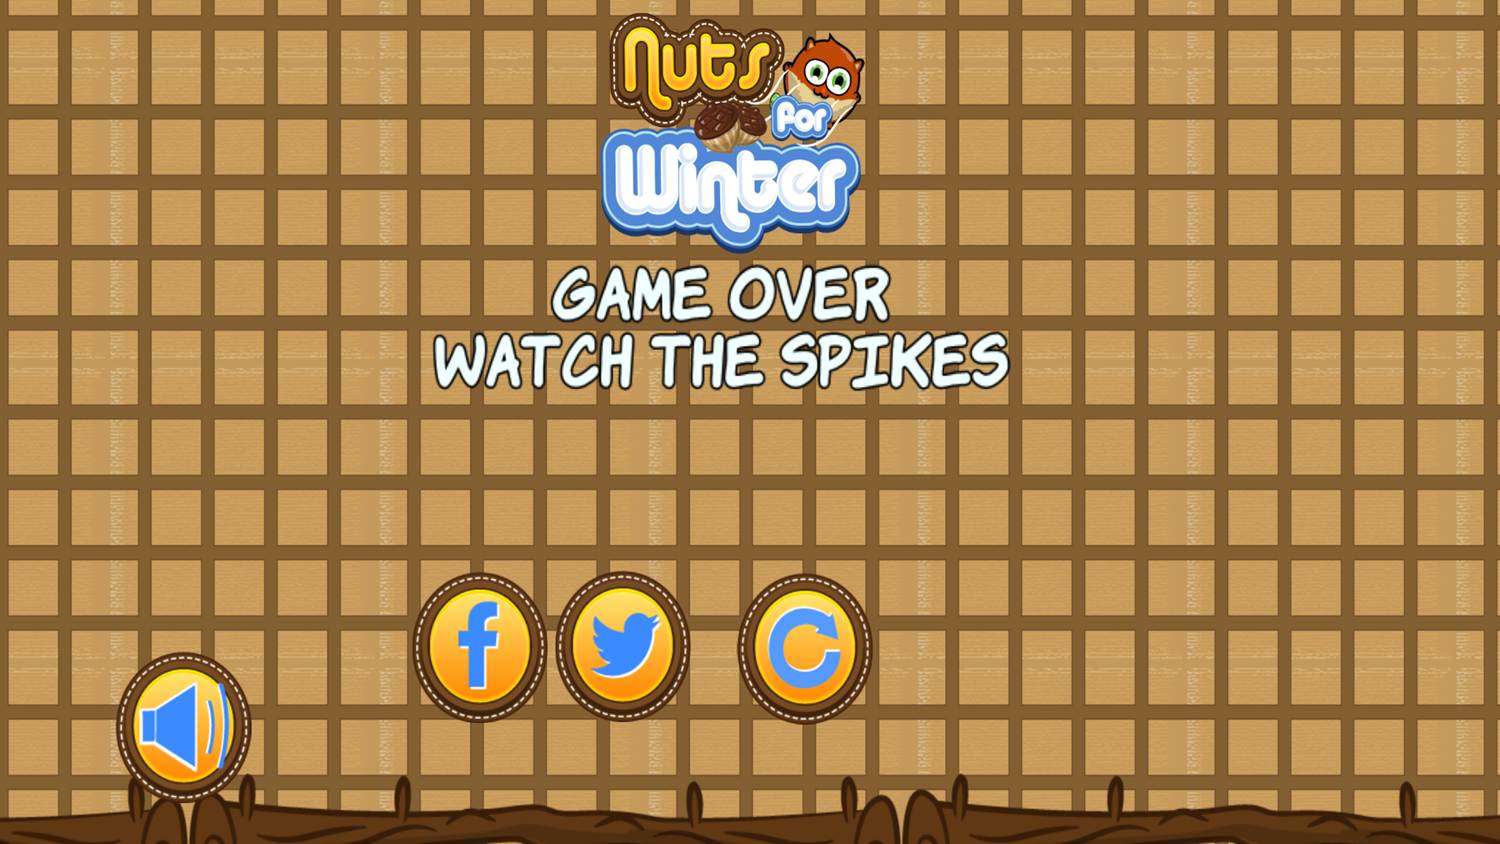 Nuts for Winter Game Over Screenshot.